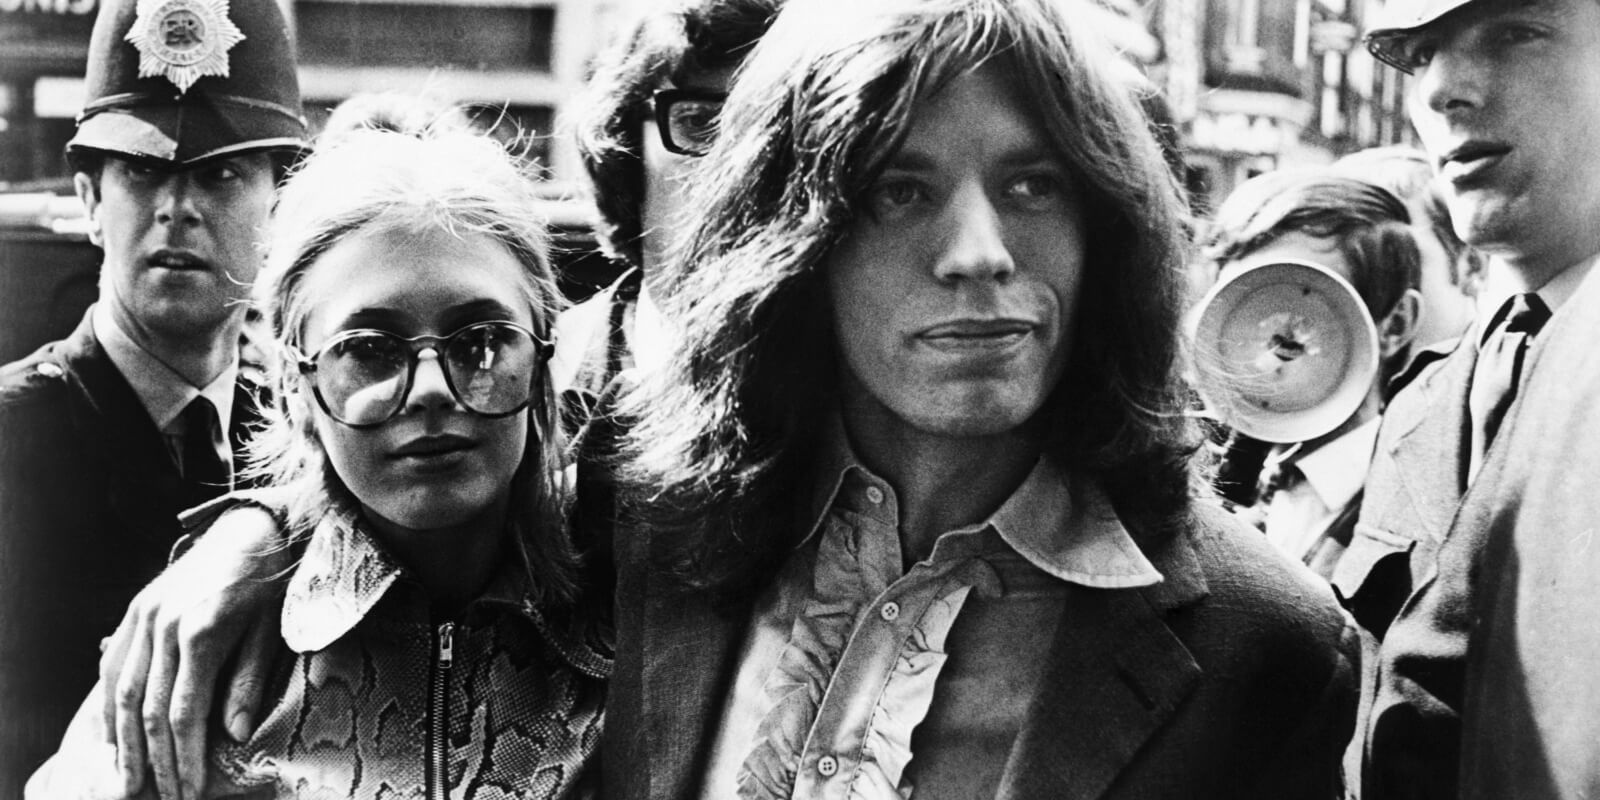 Marianne Faithfull and Mick Jagger arrive at Magistrate's Court early May 29 to face charges of possessing marijuana in 1969.